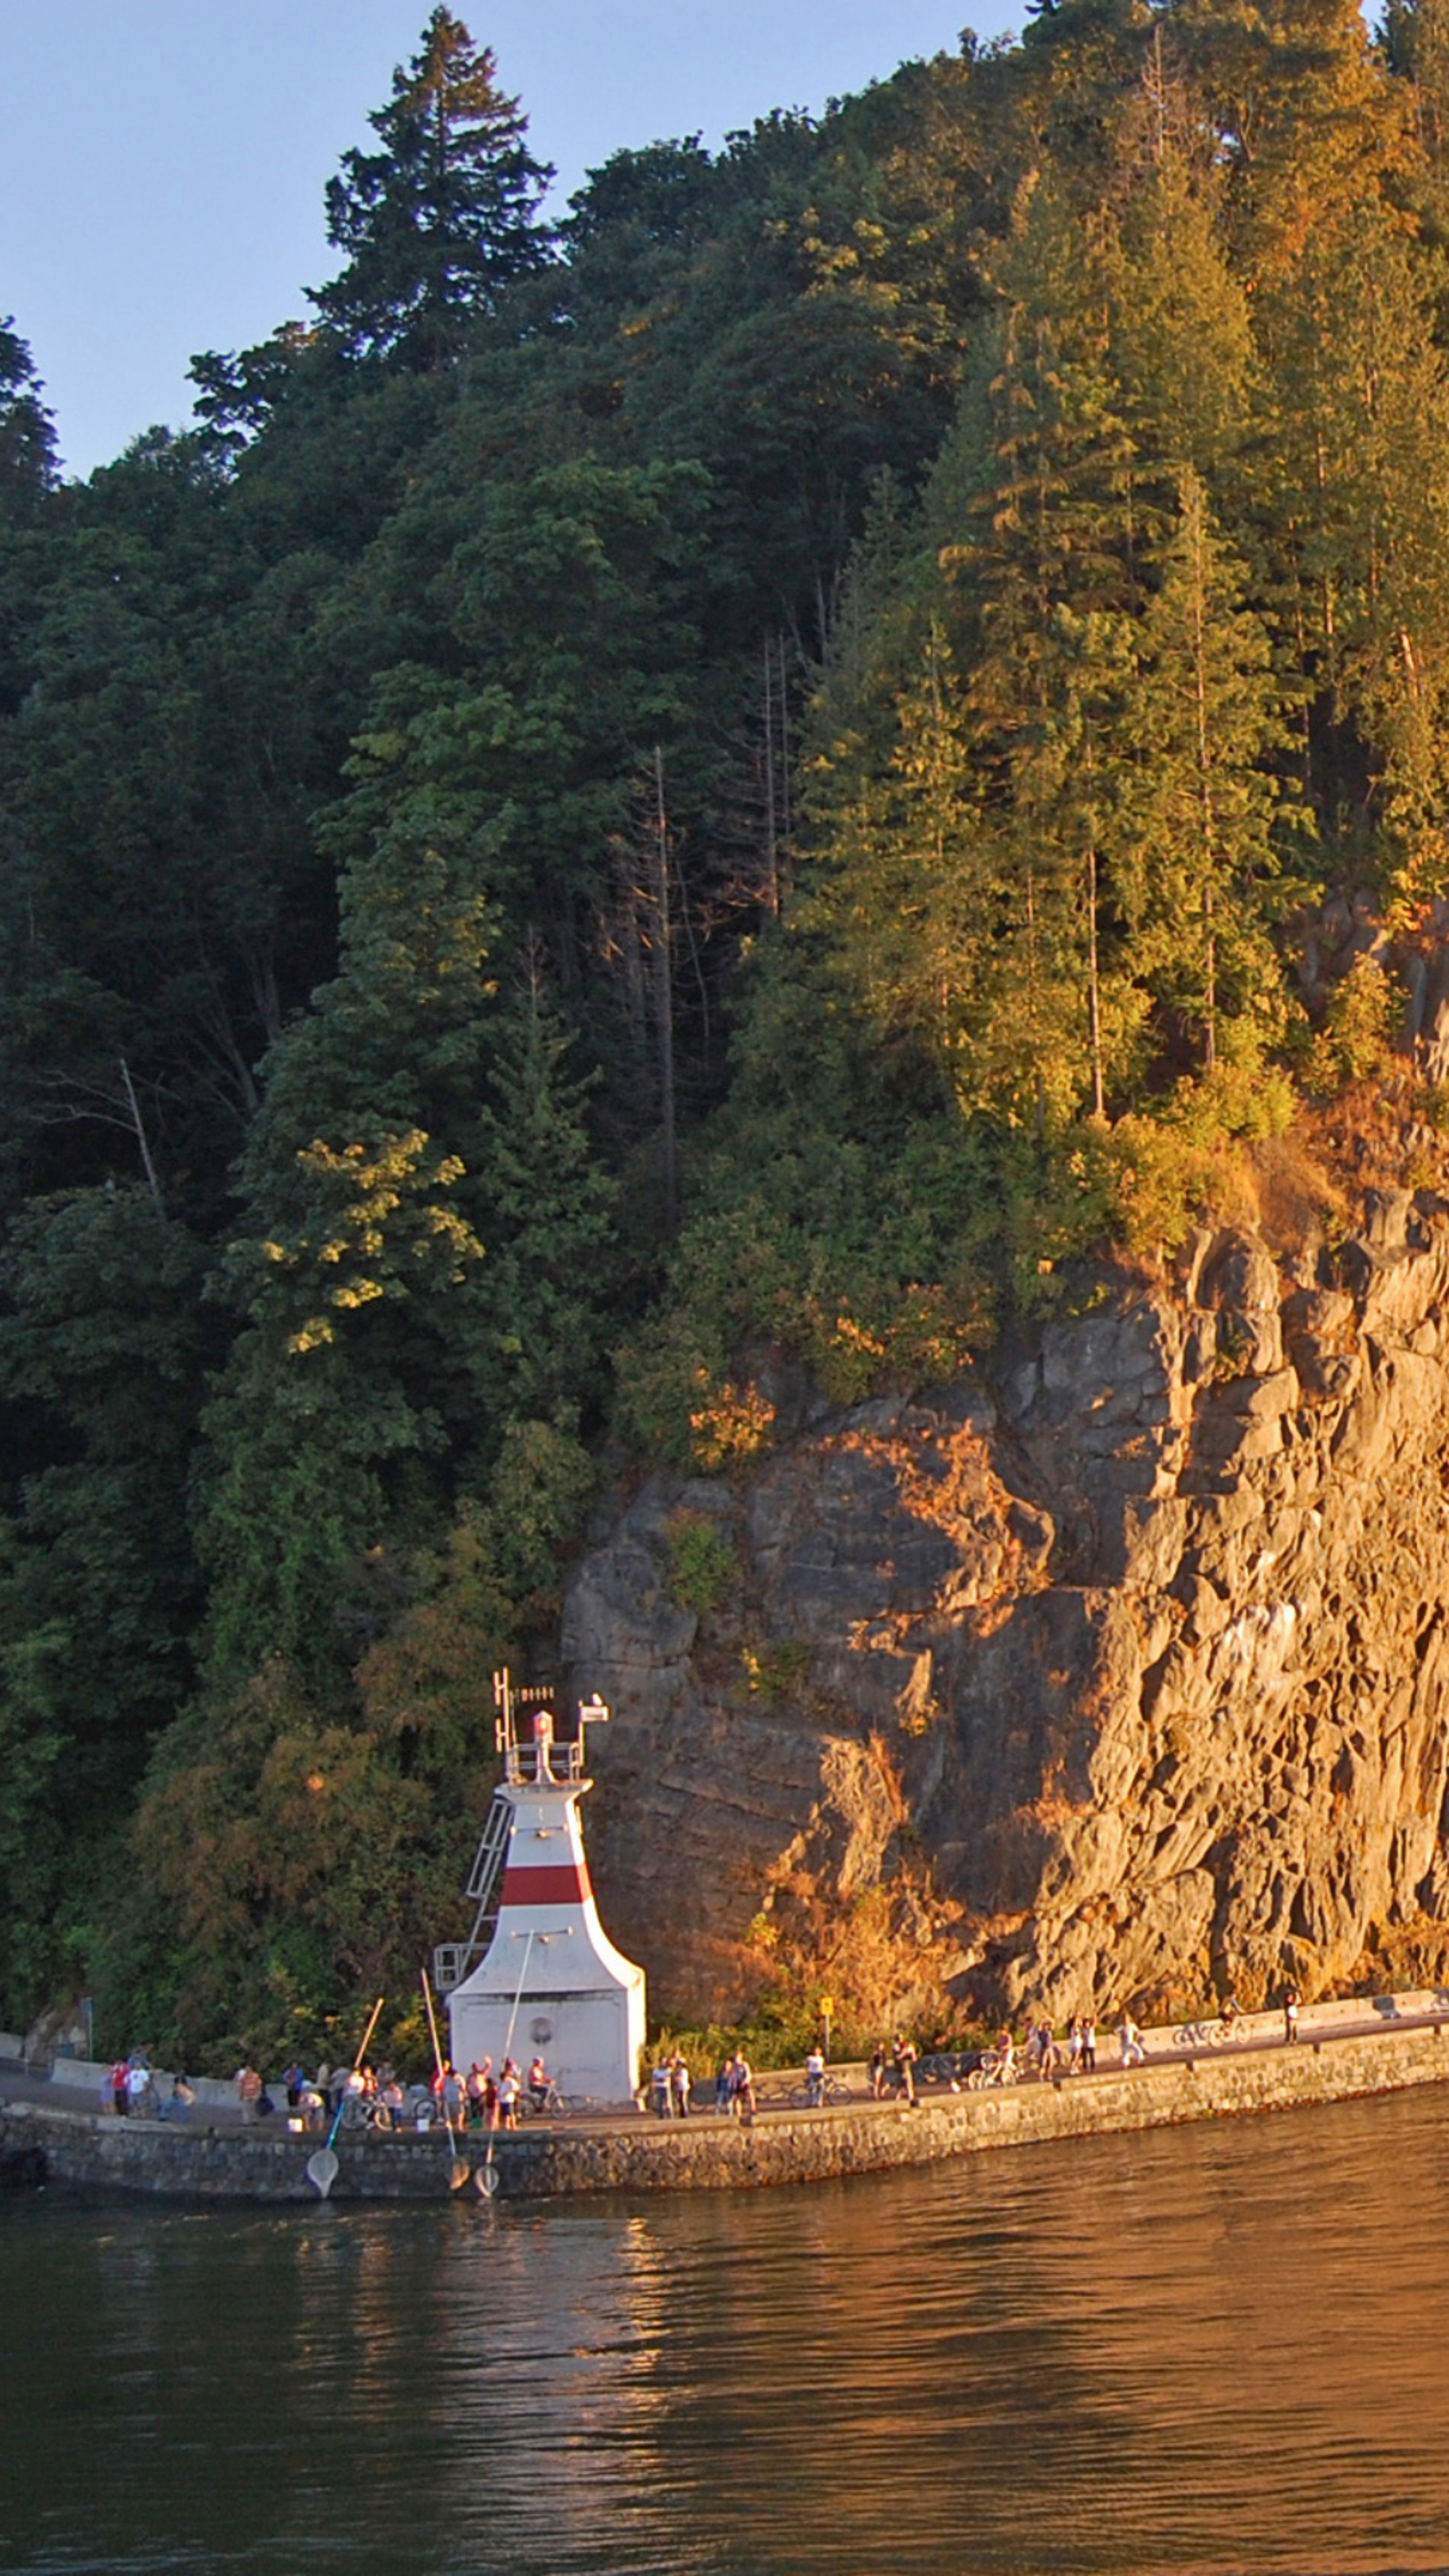 A picturesque scene featuring a lighthouse on a rocky coastline surrounded by lush forests, bathed in the warm glow of a sunset.